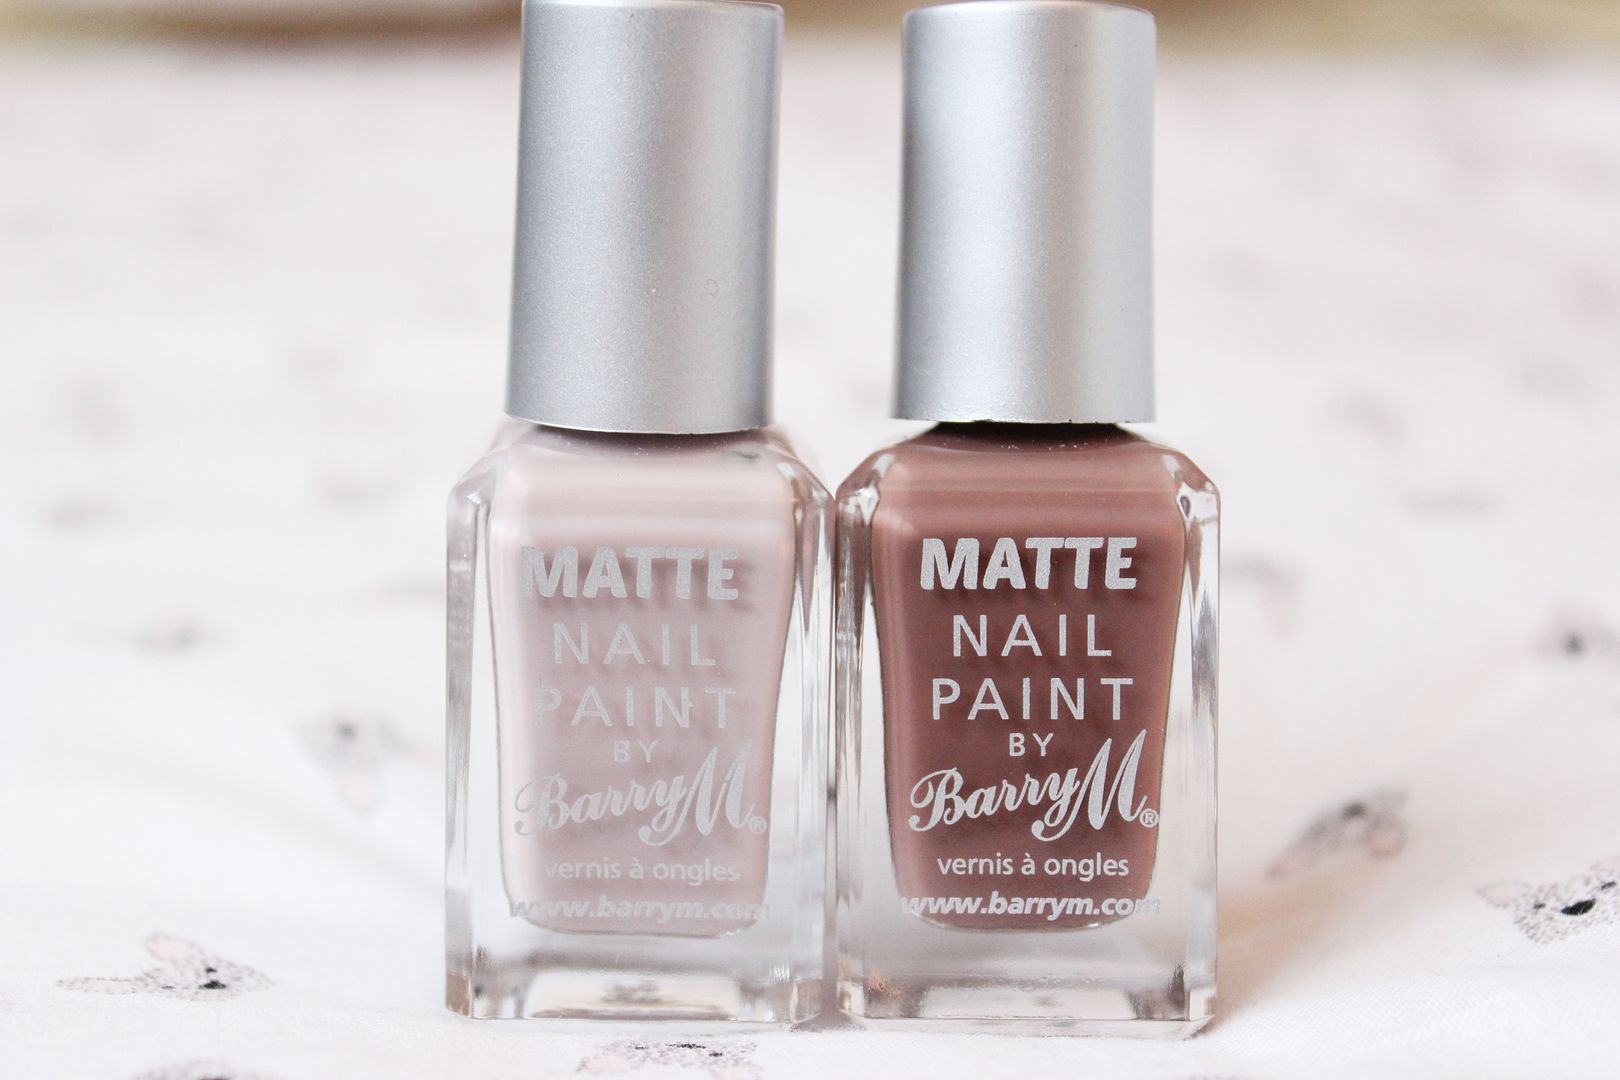 Barry M Matte Nail Polish in Nude Vanilla and Mocha Brown